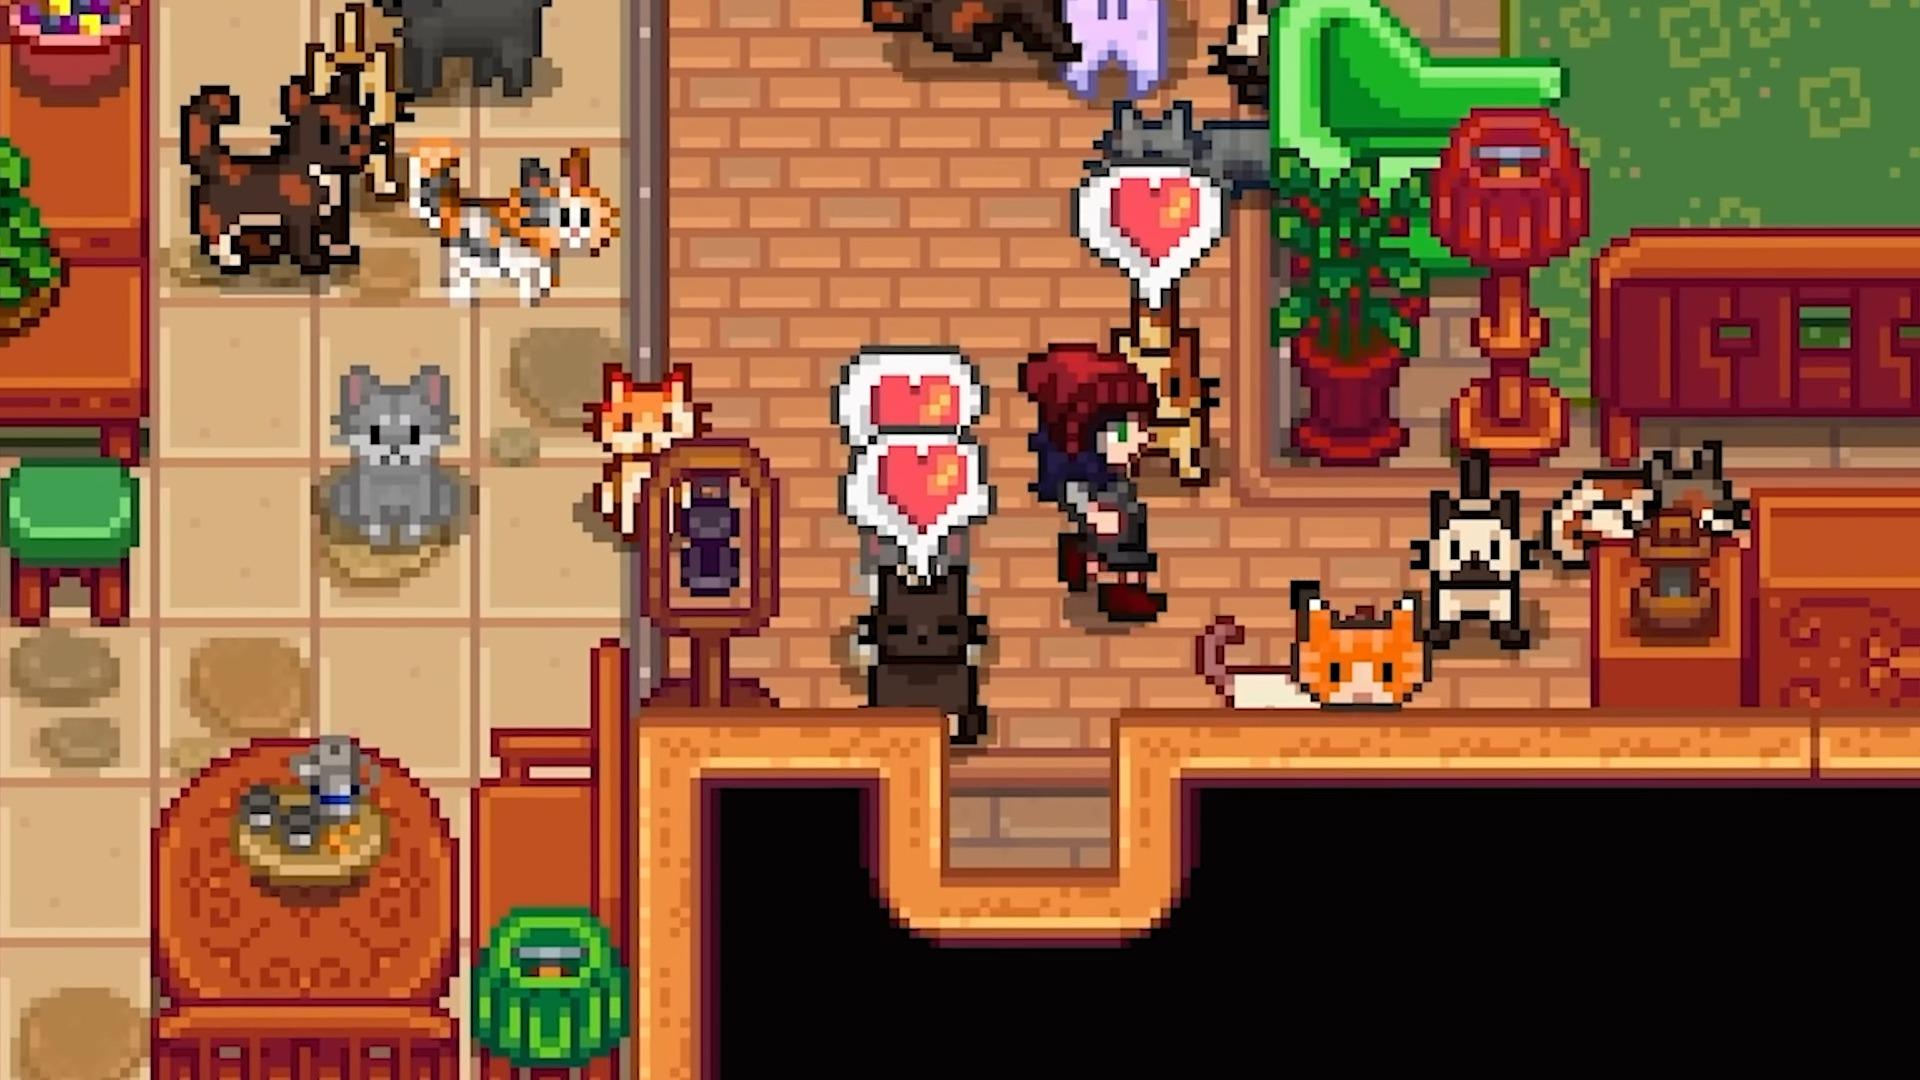 Caring for multiple pets in Stardew Valley.